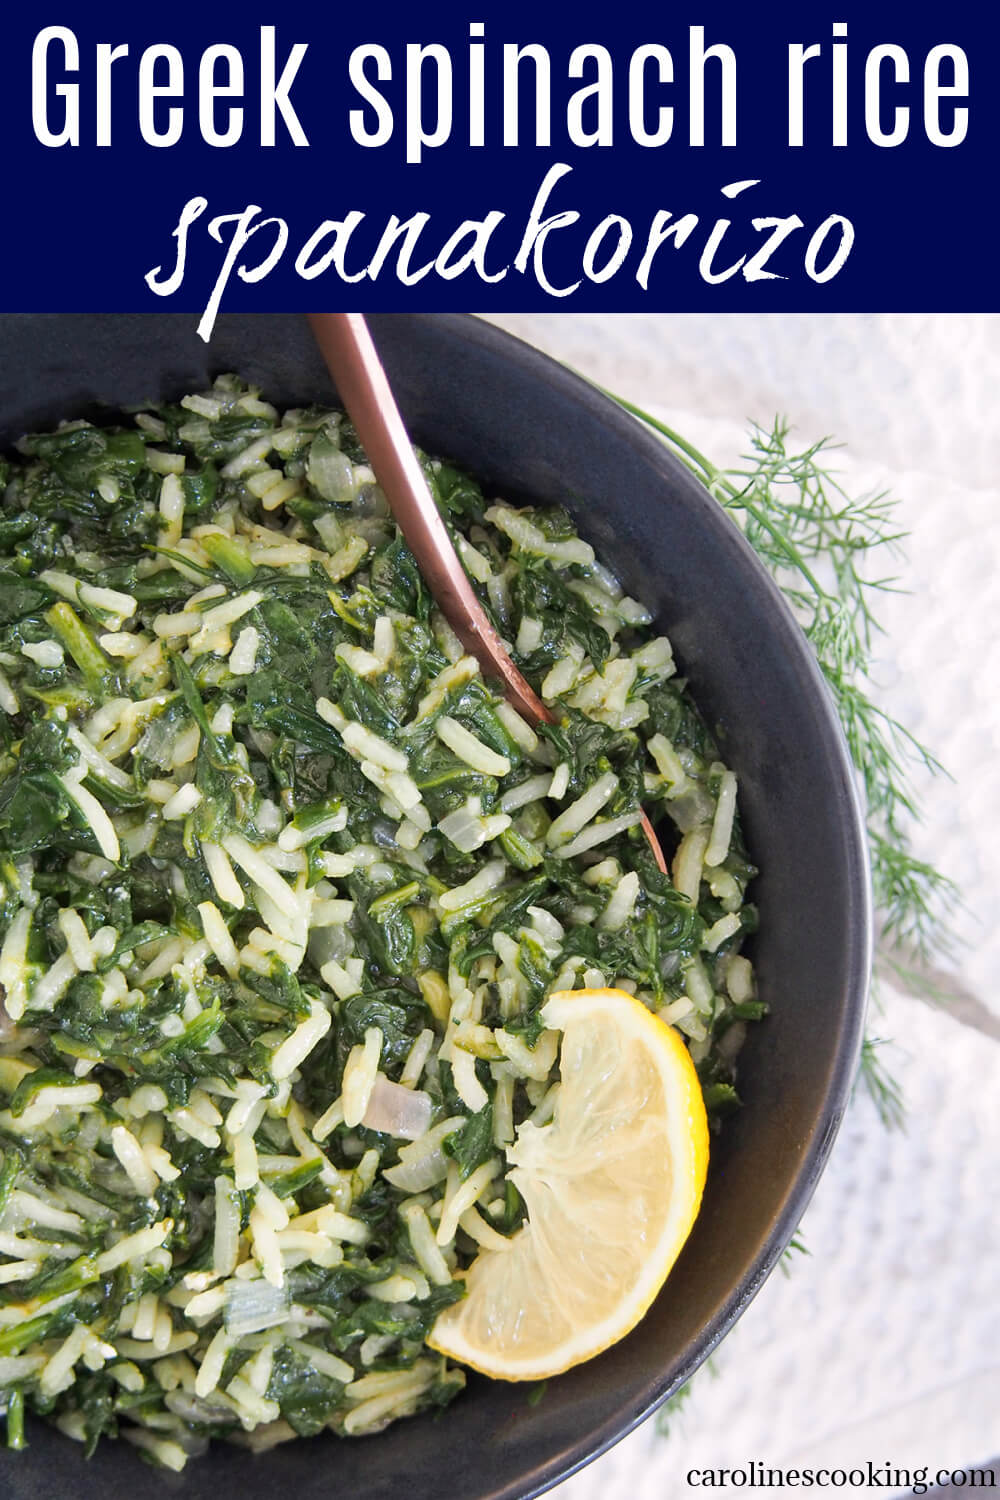 Spanakorizo ​​is a classic, comforting Greek rice and spinach dish.  It's great as a side dish to many mains, but also works as a vegetarian main.  It's easy to make, packed with goodness and tasty, too.  #spinachrice #vegan #greekfood